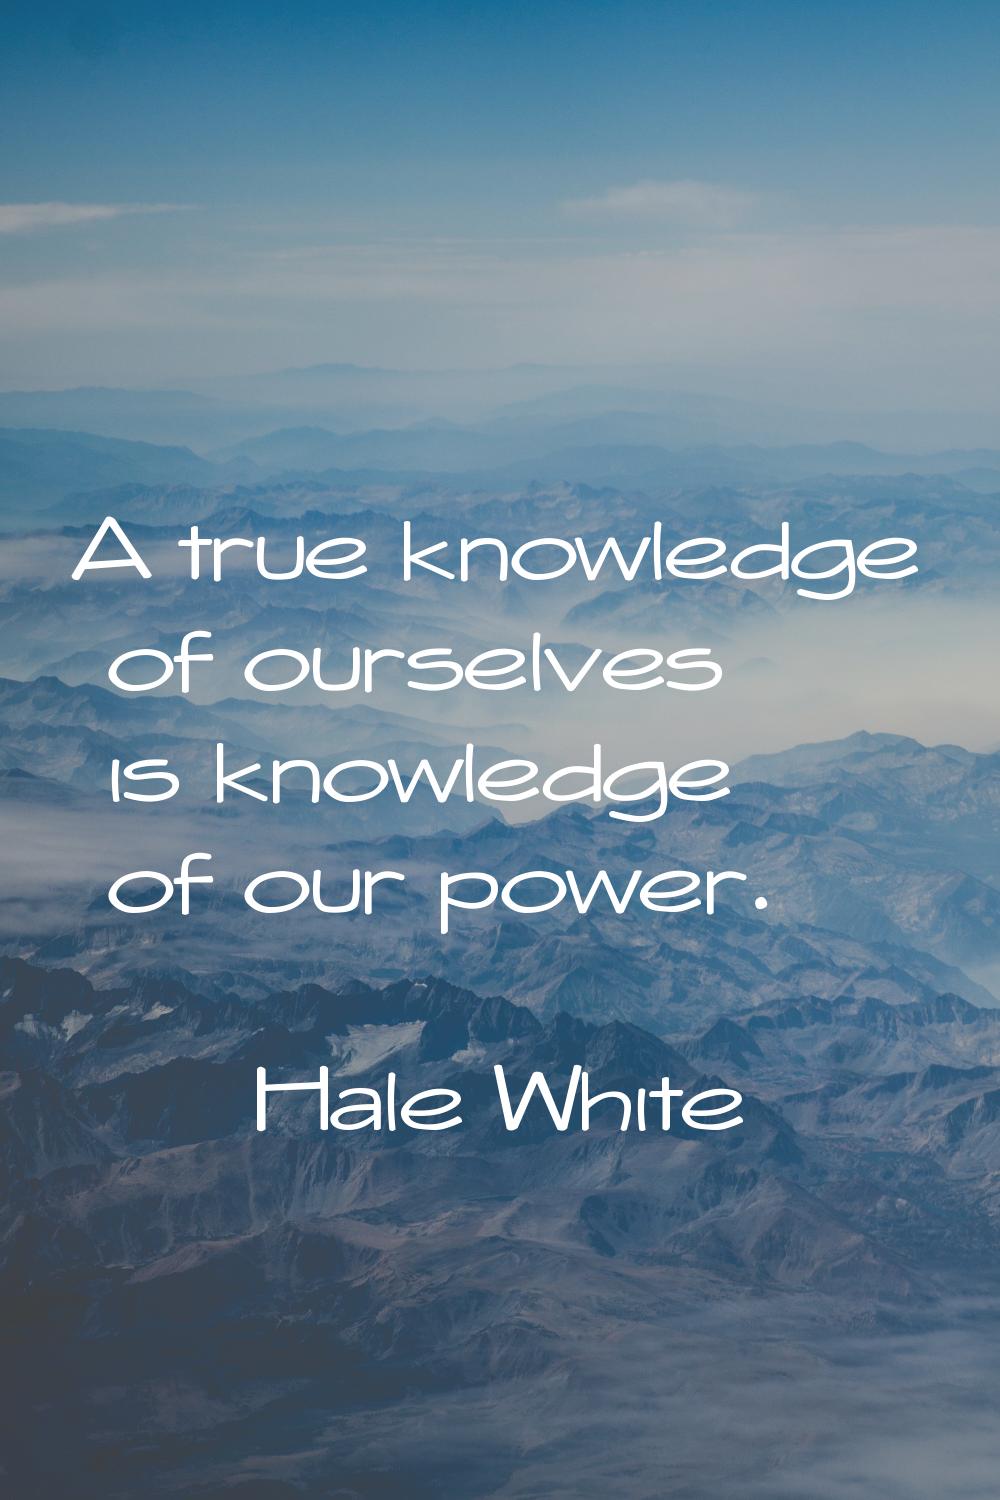 A true knowledge of ourselves is knowledge of our power.